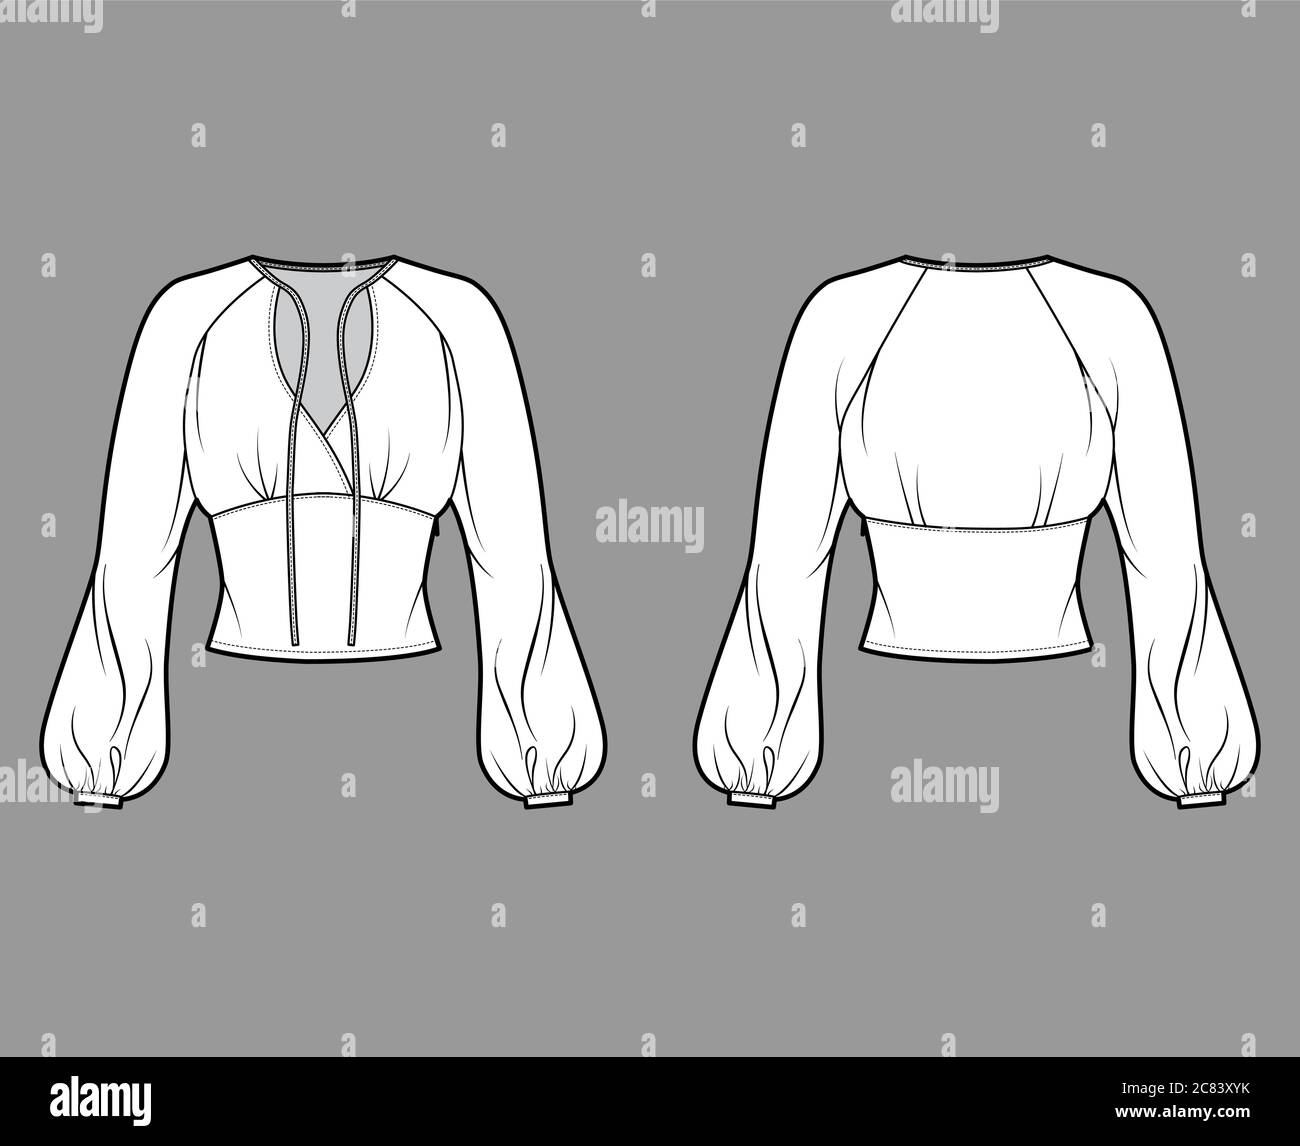 Blouse technical fashion illustration with long bishop sleeves, surplice neckline ties at front, fitted body. Flat apparel shirt template front back white color. Women men, unisex top CAD mockup Stock Vector